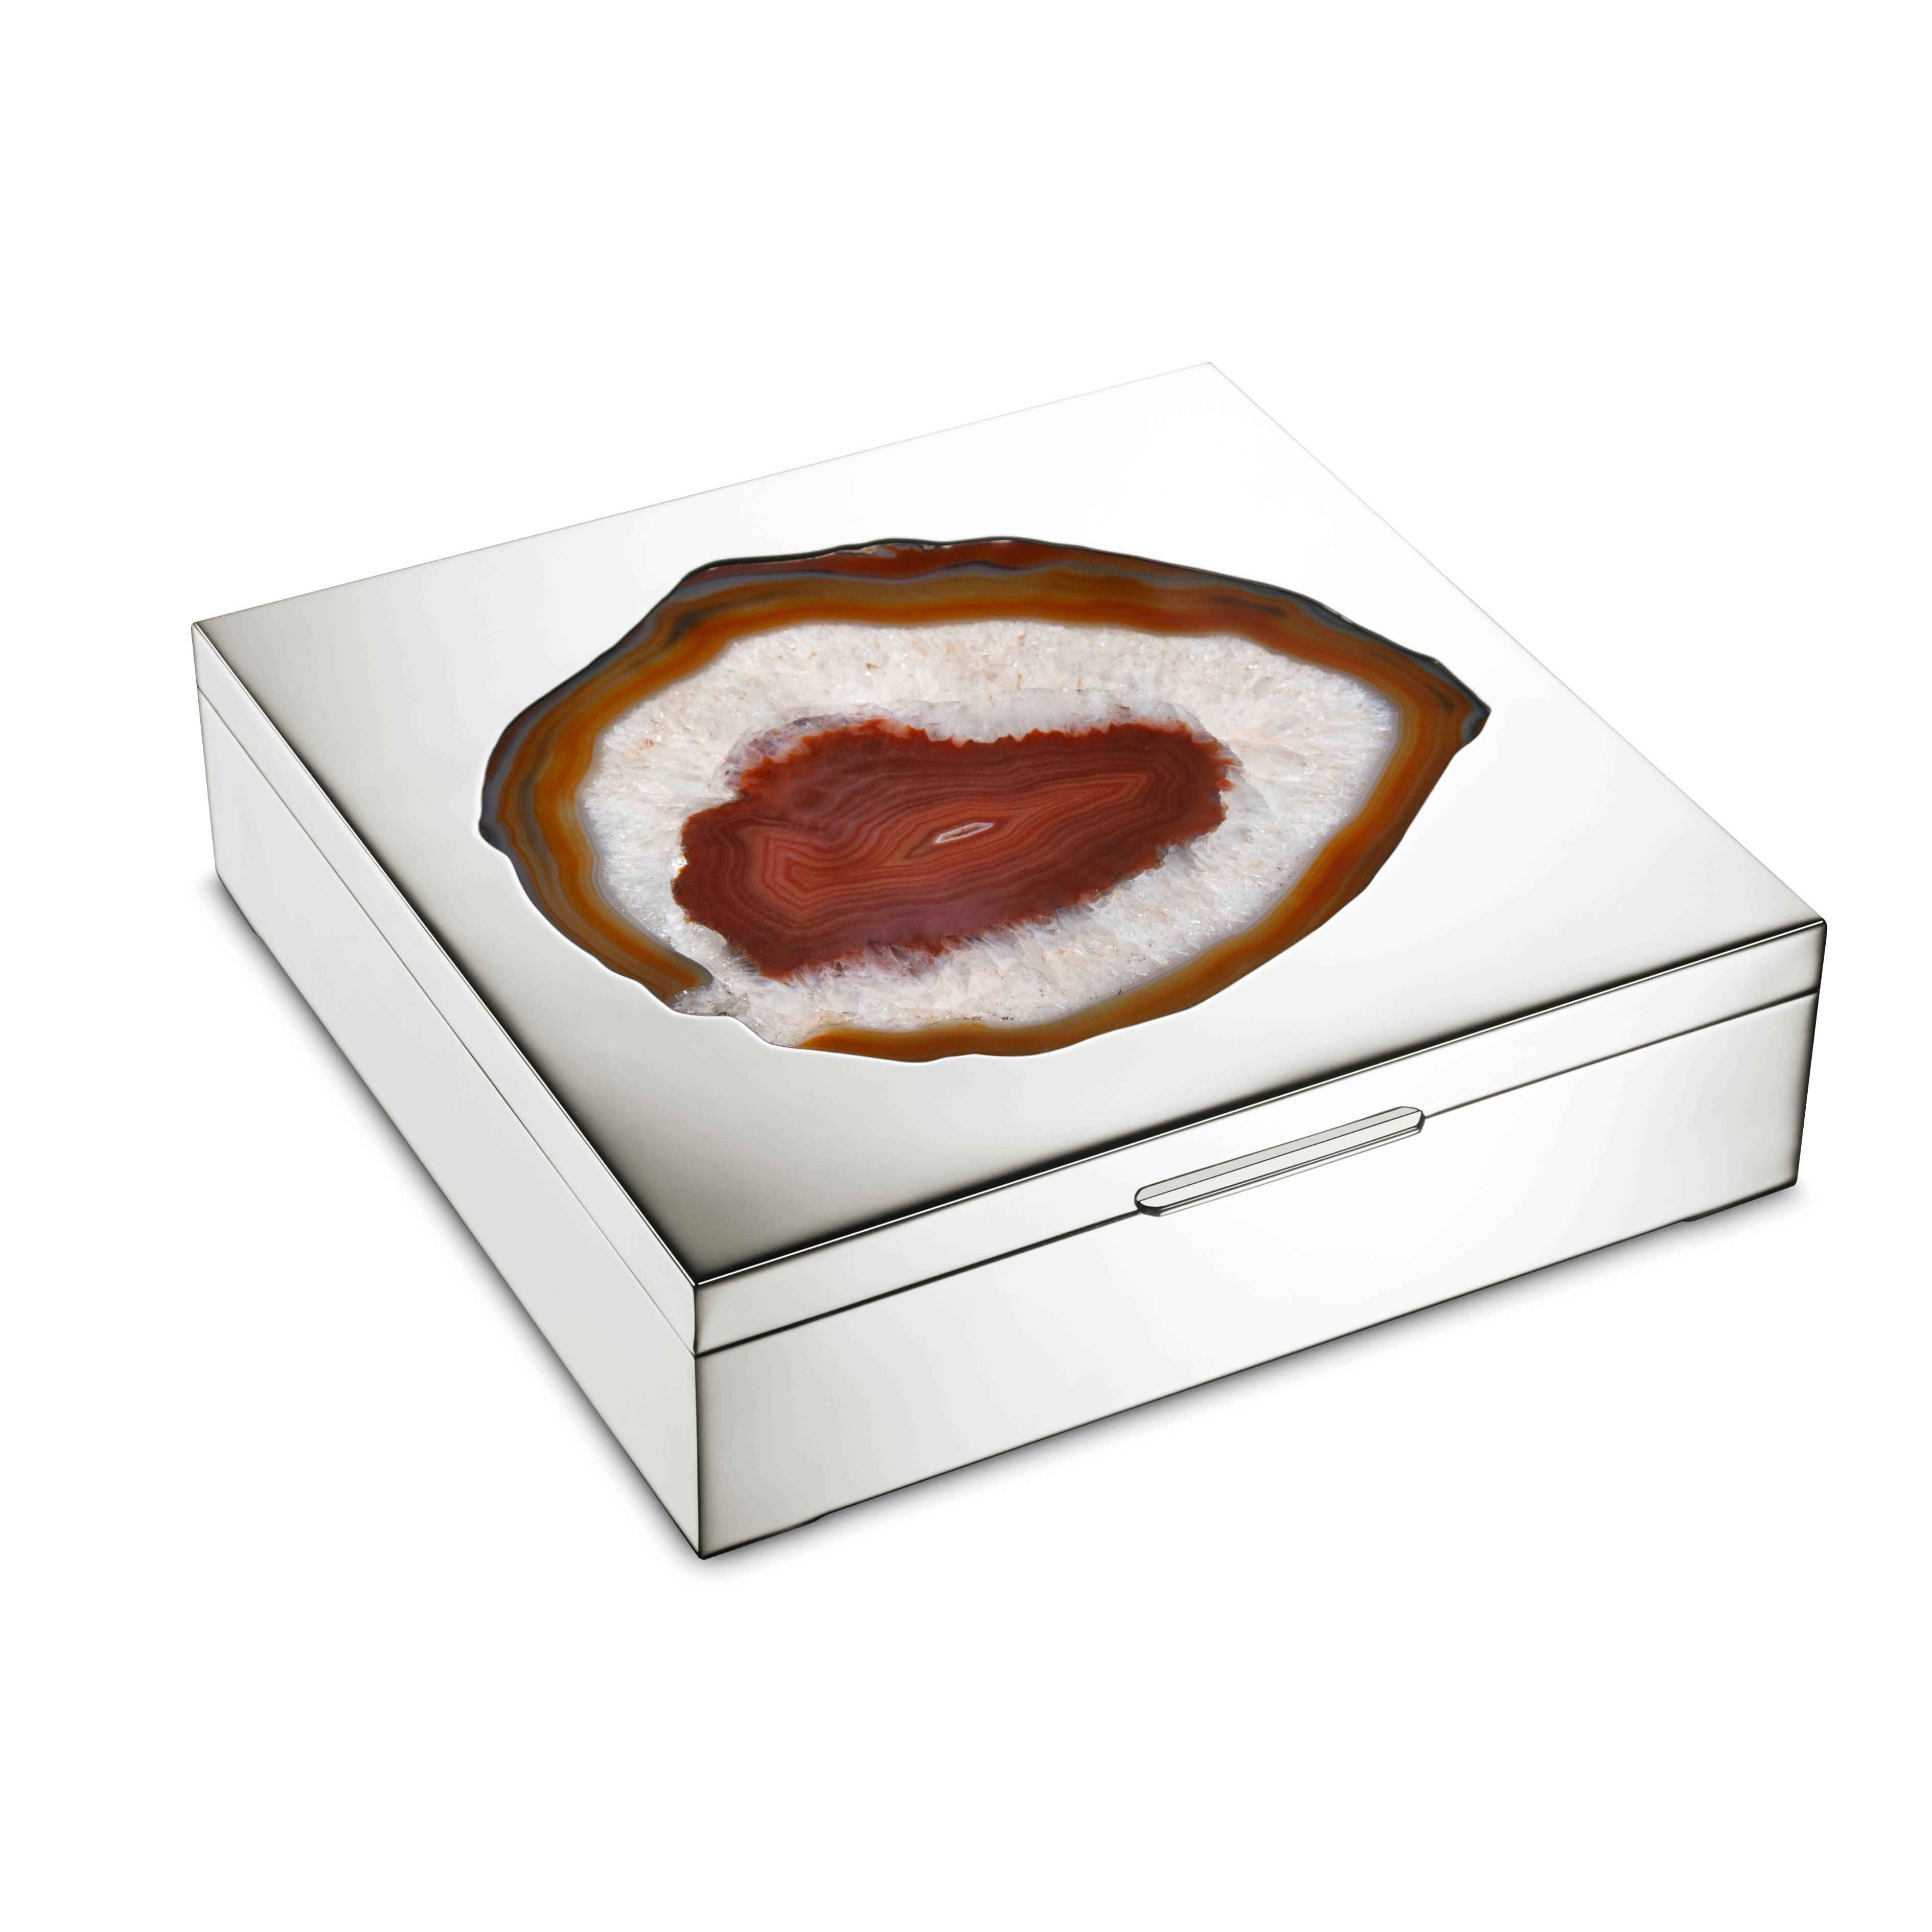 Handmade 925 sterling silver box with brown agate and wooden interior